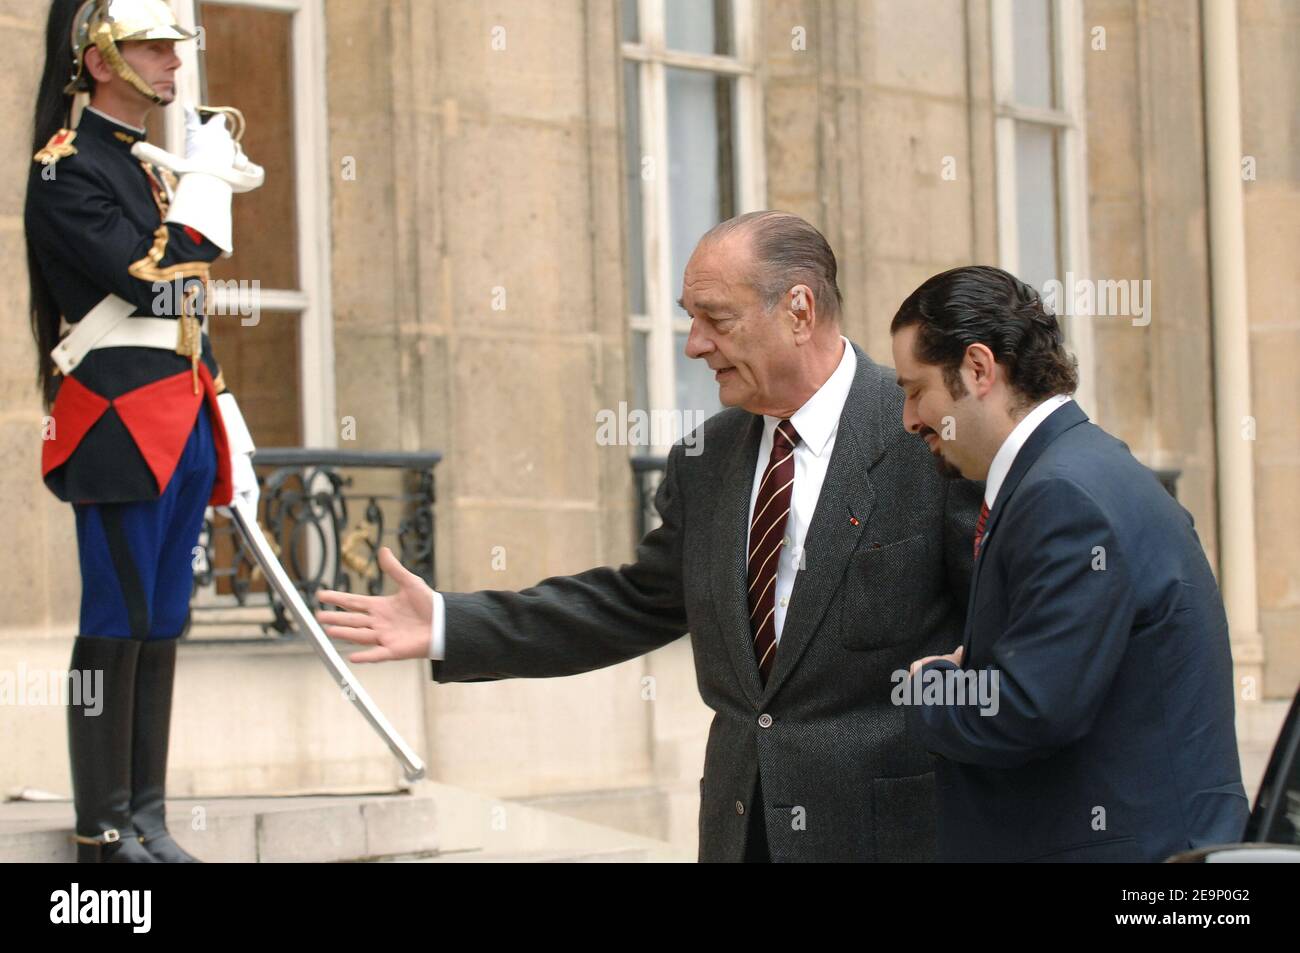 French President Jacques Chirac, receives Saad Hariri, leader of Lebanon's parliamentary majority 'Future' party, and son of the assassinated Prime Minister Rafic Hariri, at the Elysee Palace in Paris, on October 19, 2006. Chirac and Saad Hariri meet to discuss preparations for a new international conference on Lebanon to be held in Paris in January 2007. Photo by Ammar Abd Rabbo/ABACAPRESS.COM Stock Photo